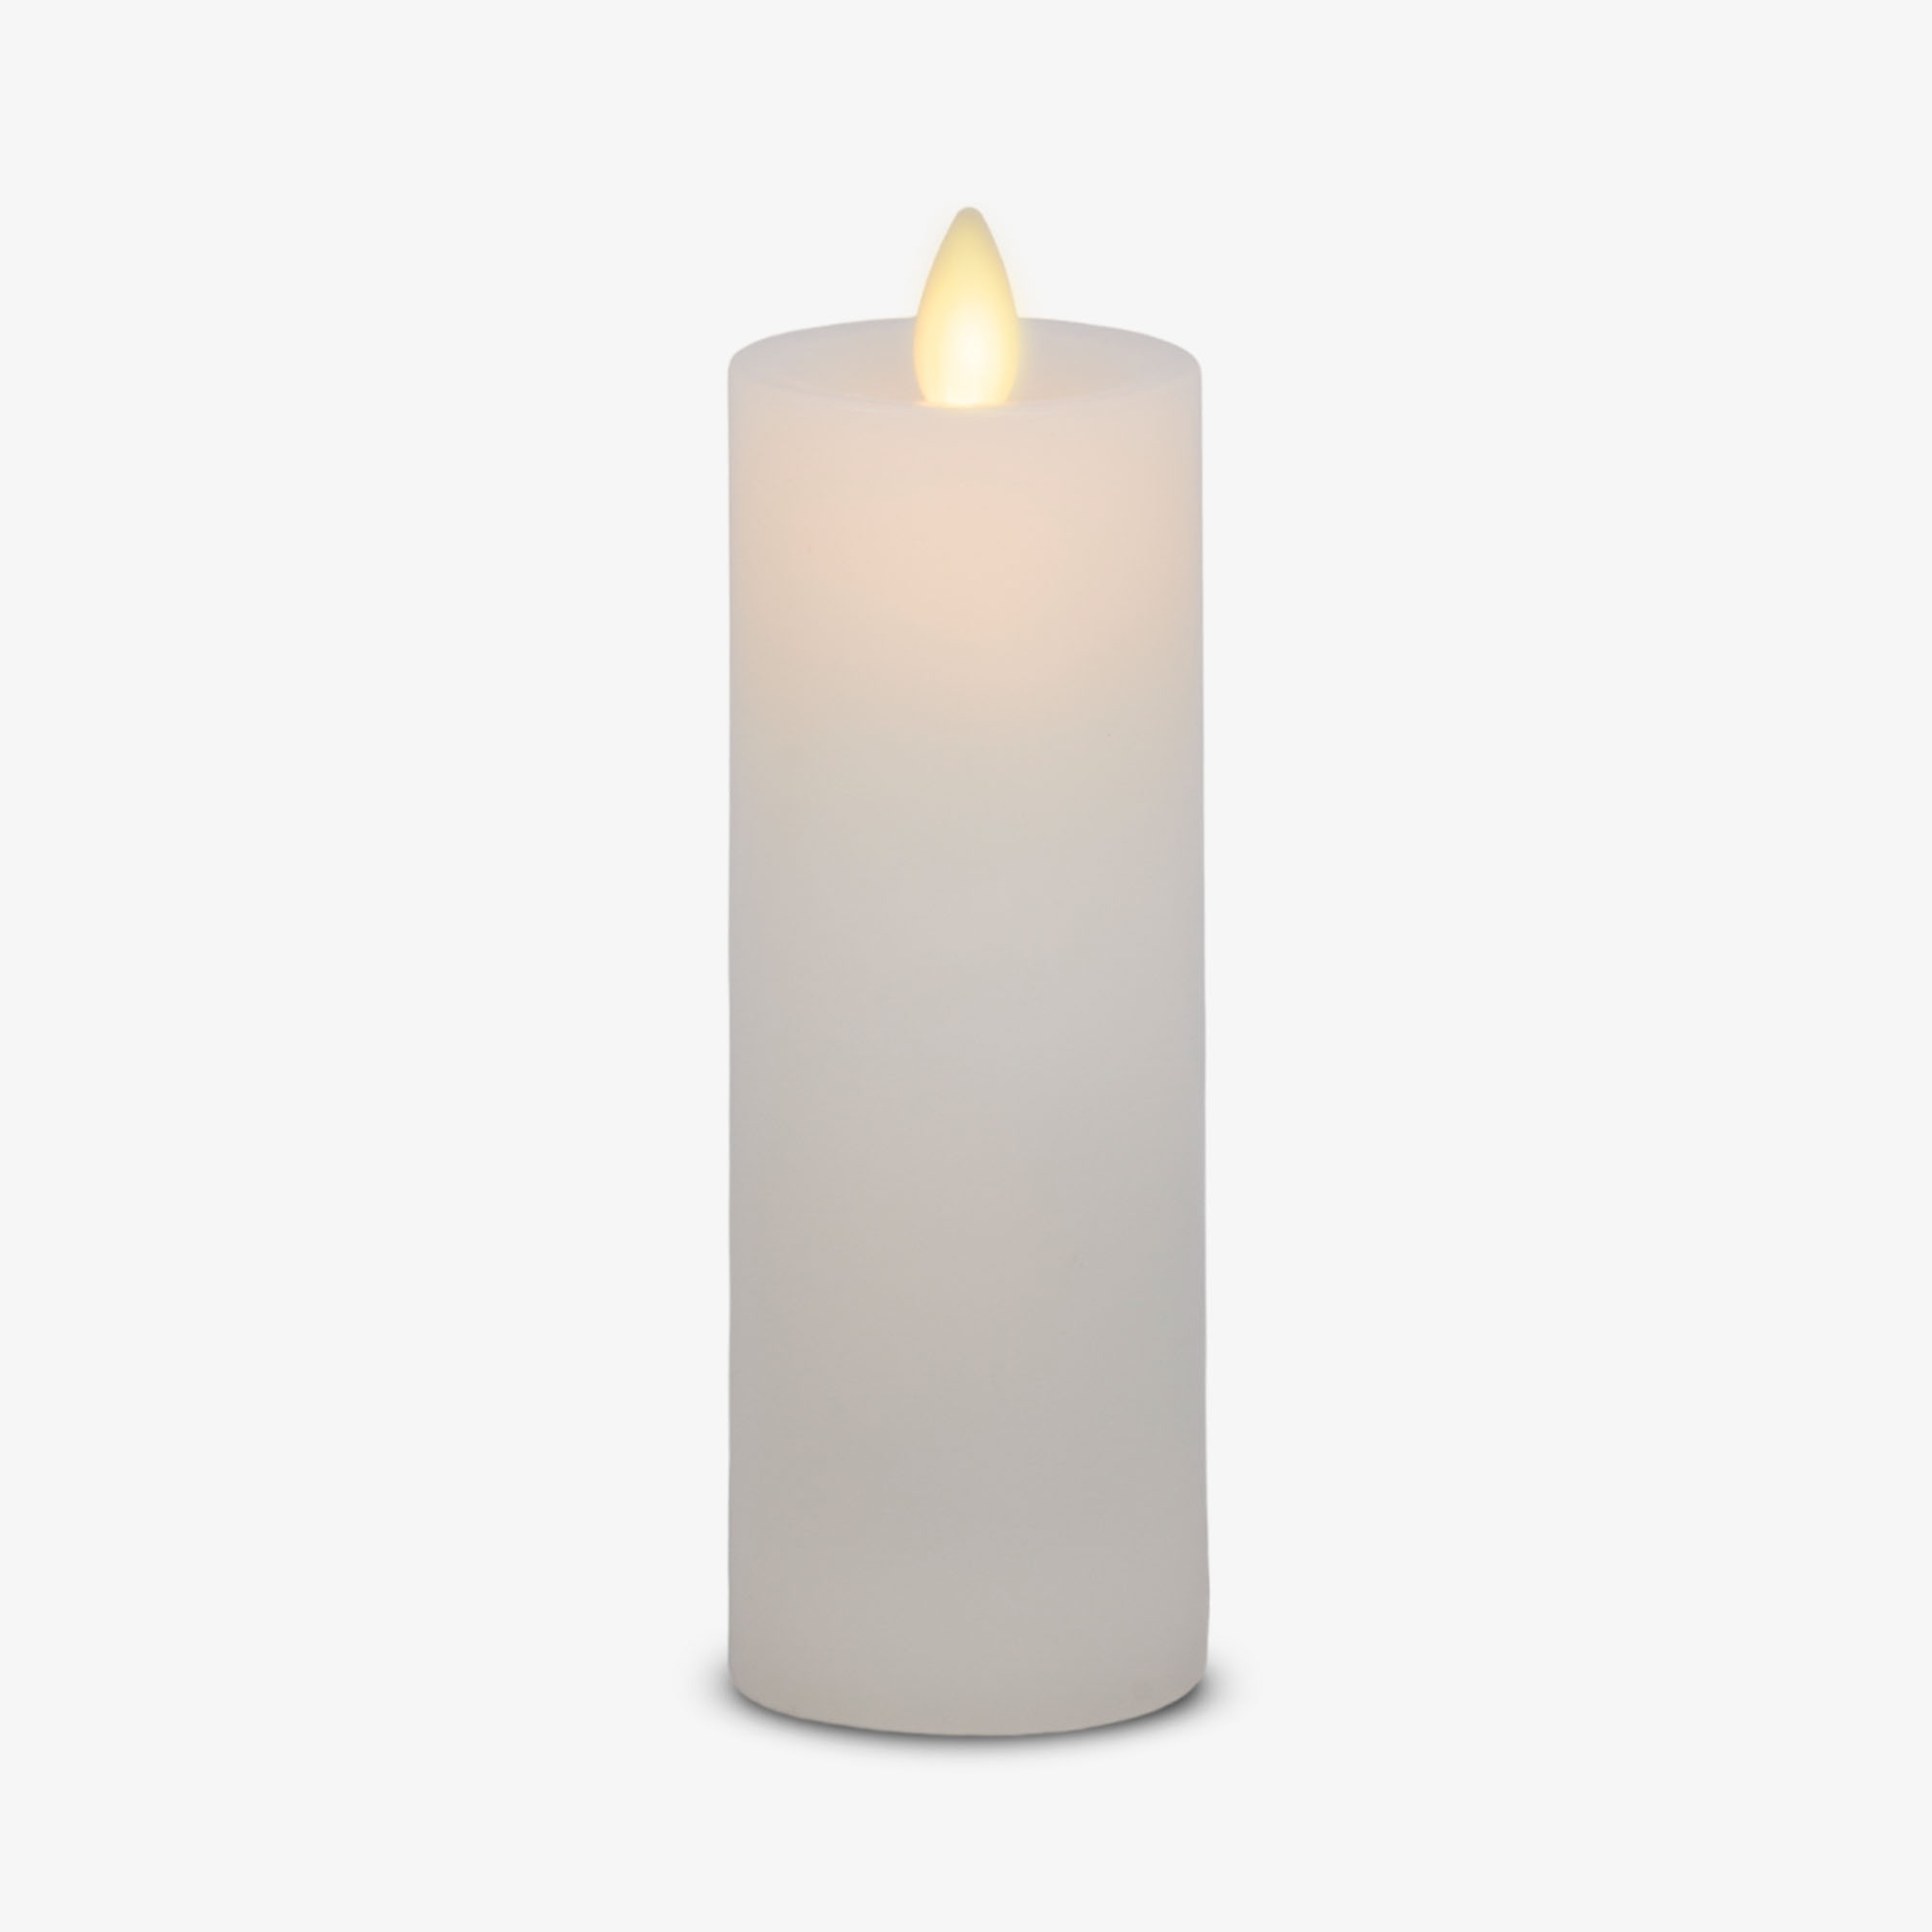 an image of our white Luminara candle